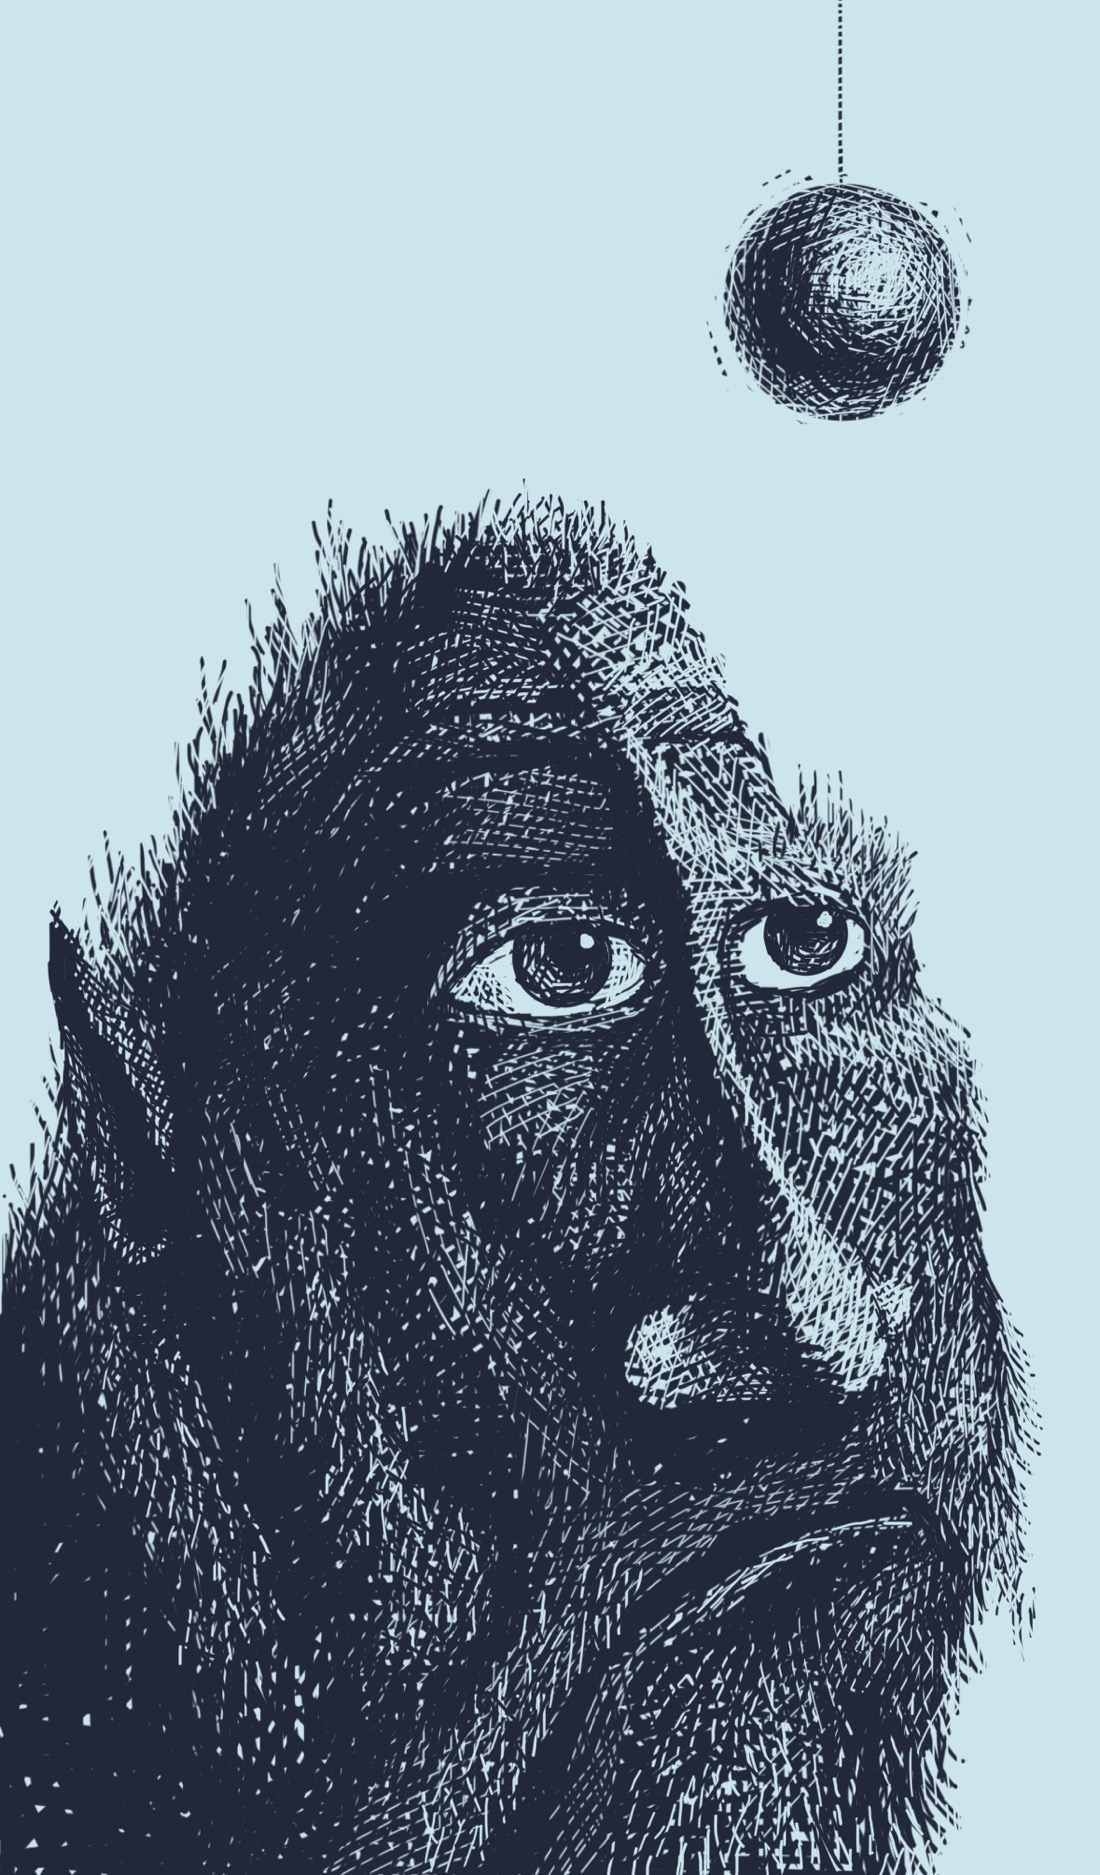 A creature with heavy, primitive facial features, pointed ears, fur all over its face, and eerily expressive eyes stares pensively at a small sphere suspended by a string above its head. Only the creature's conical, gorilla-esque head is shown.